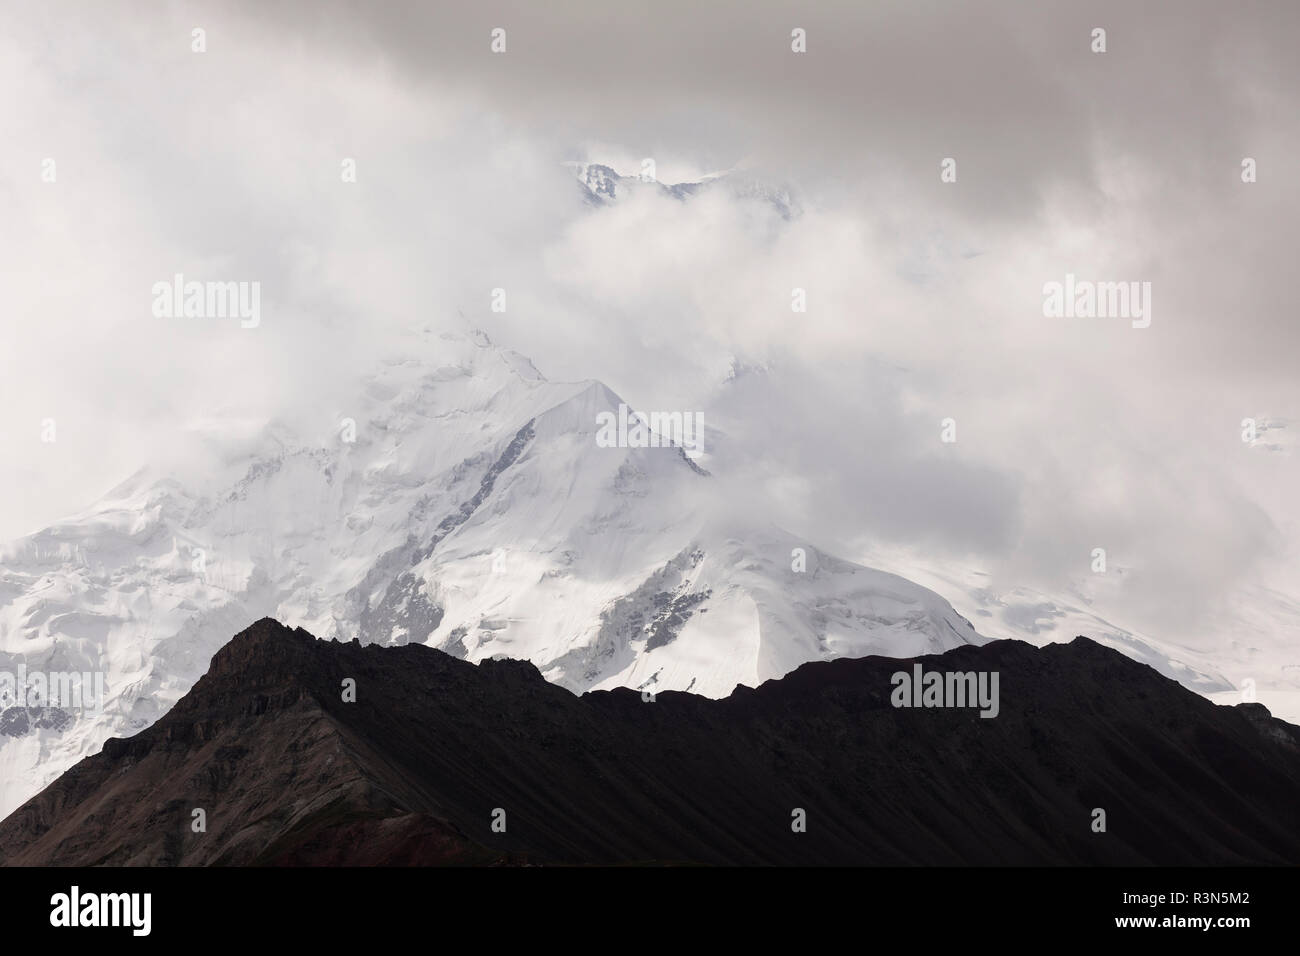 Pamir mountains with peak Lenin, which is shrouded by clouds, Kyrgyzstan Stock Photo